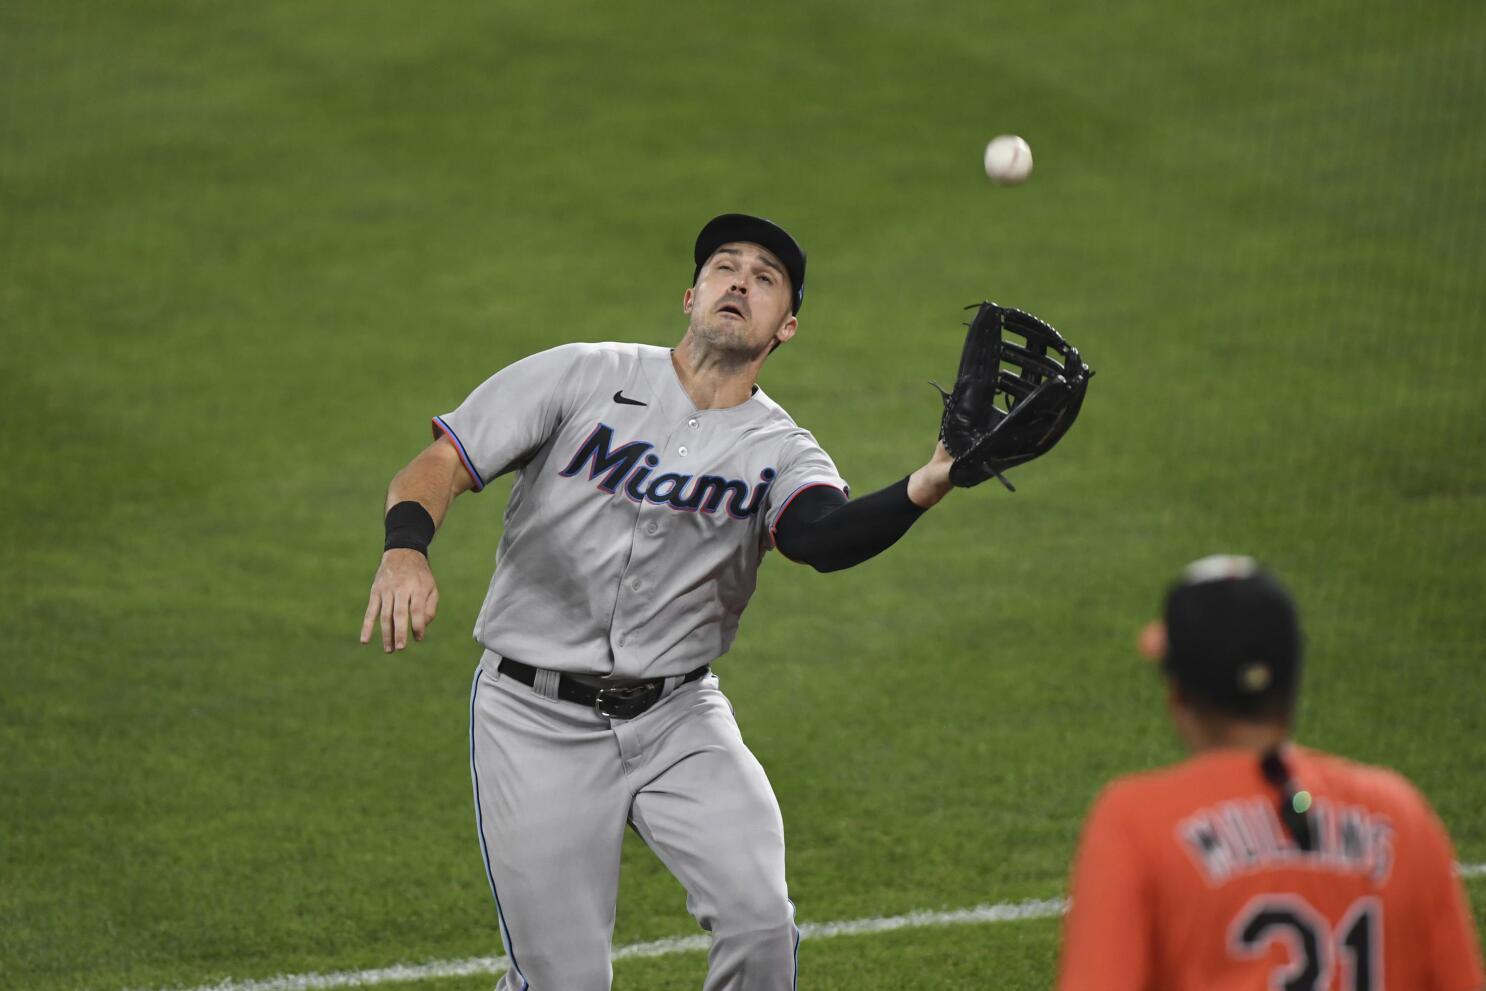 Adam Duvall, like the Miami Marlins, plans to grow in 2021